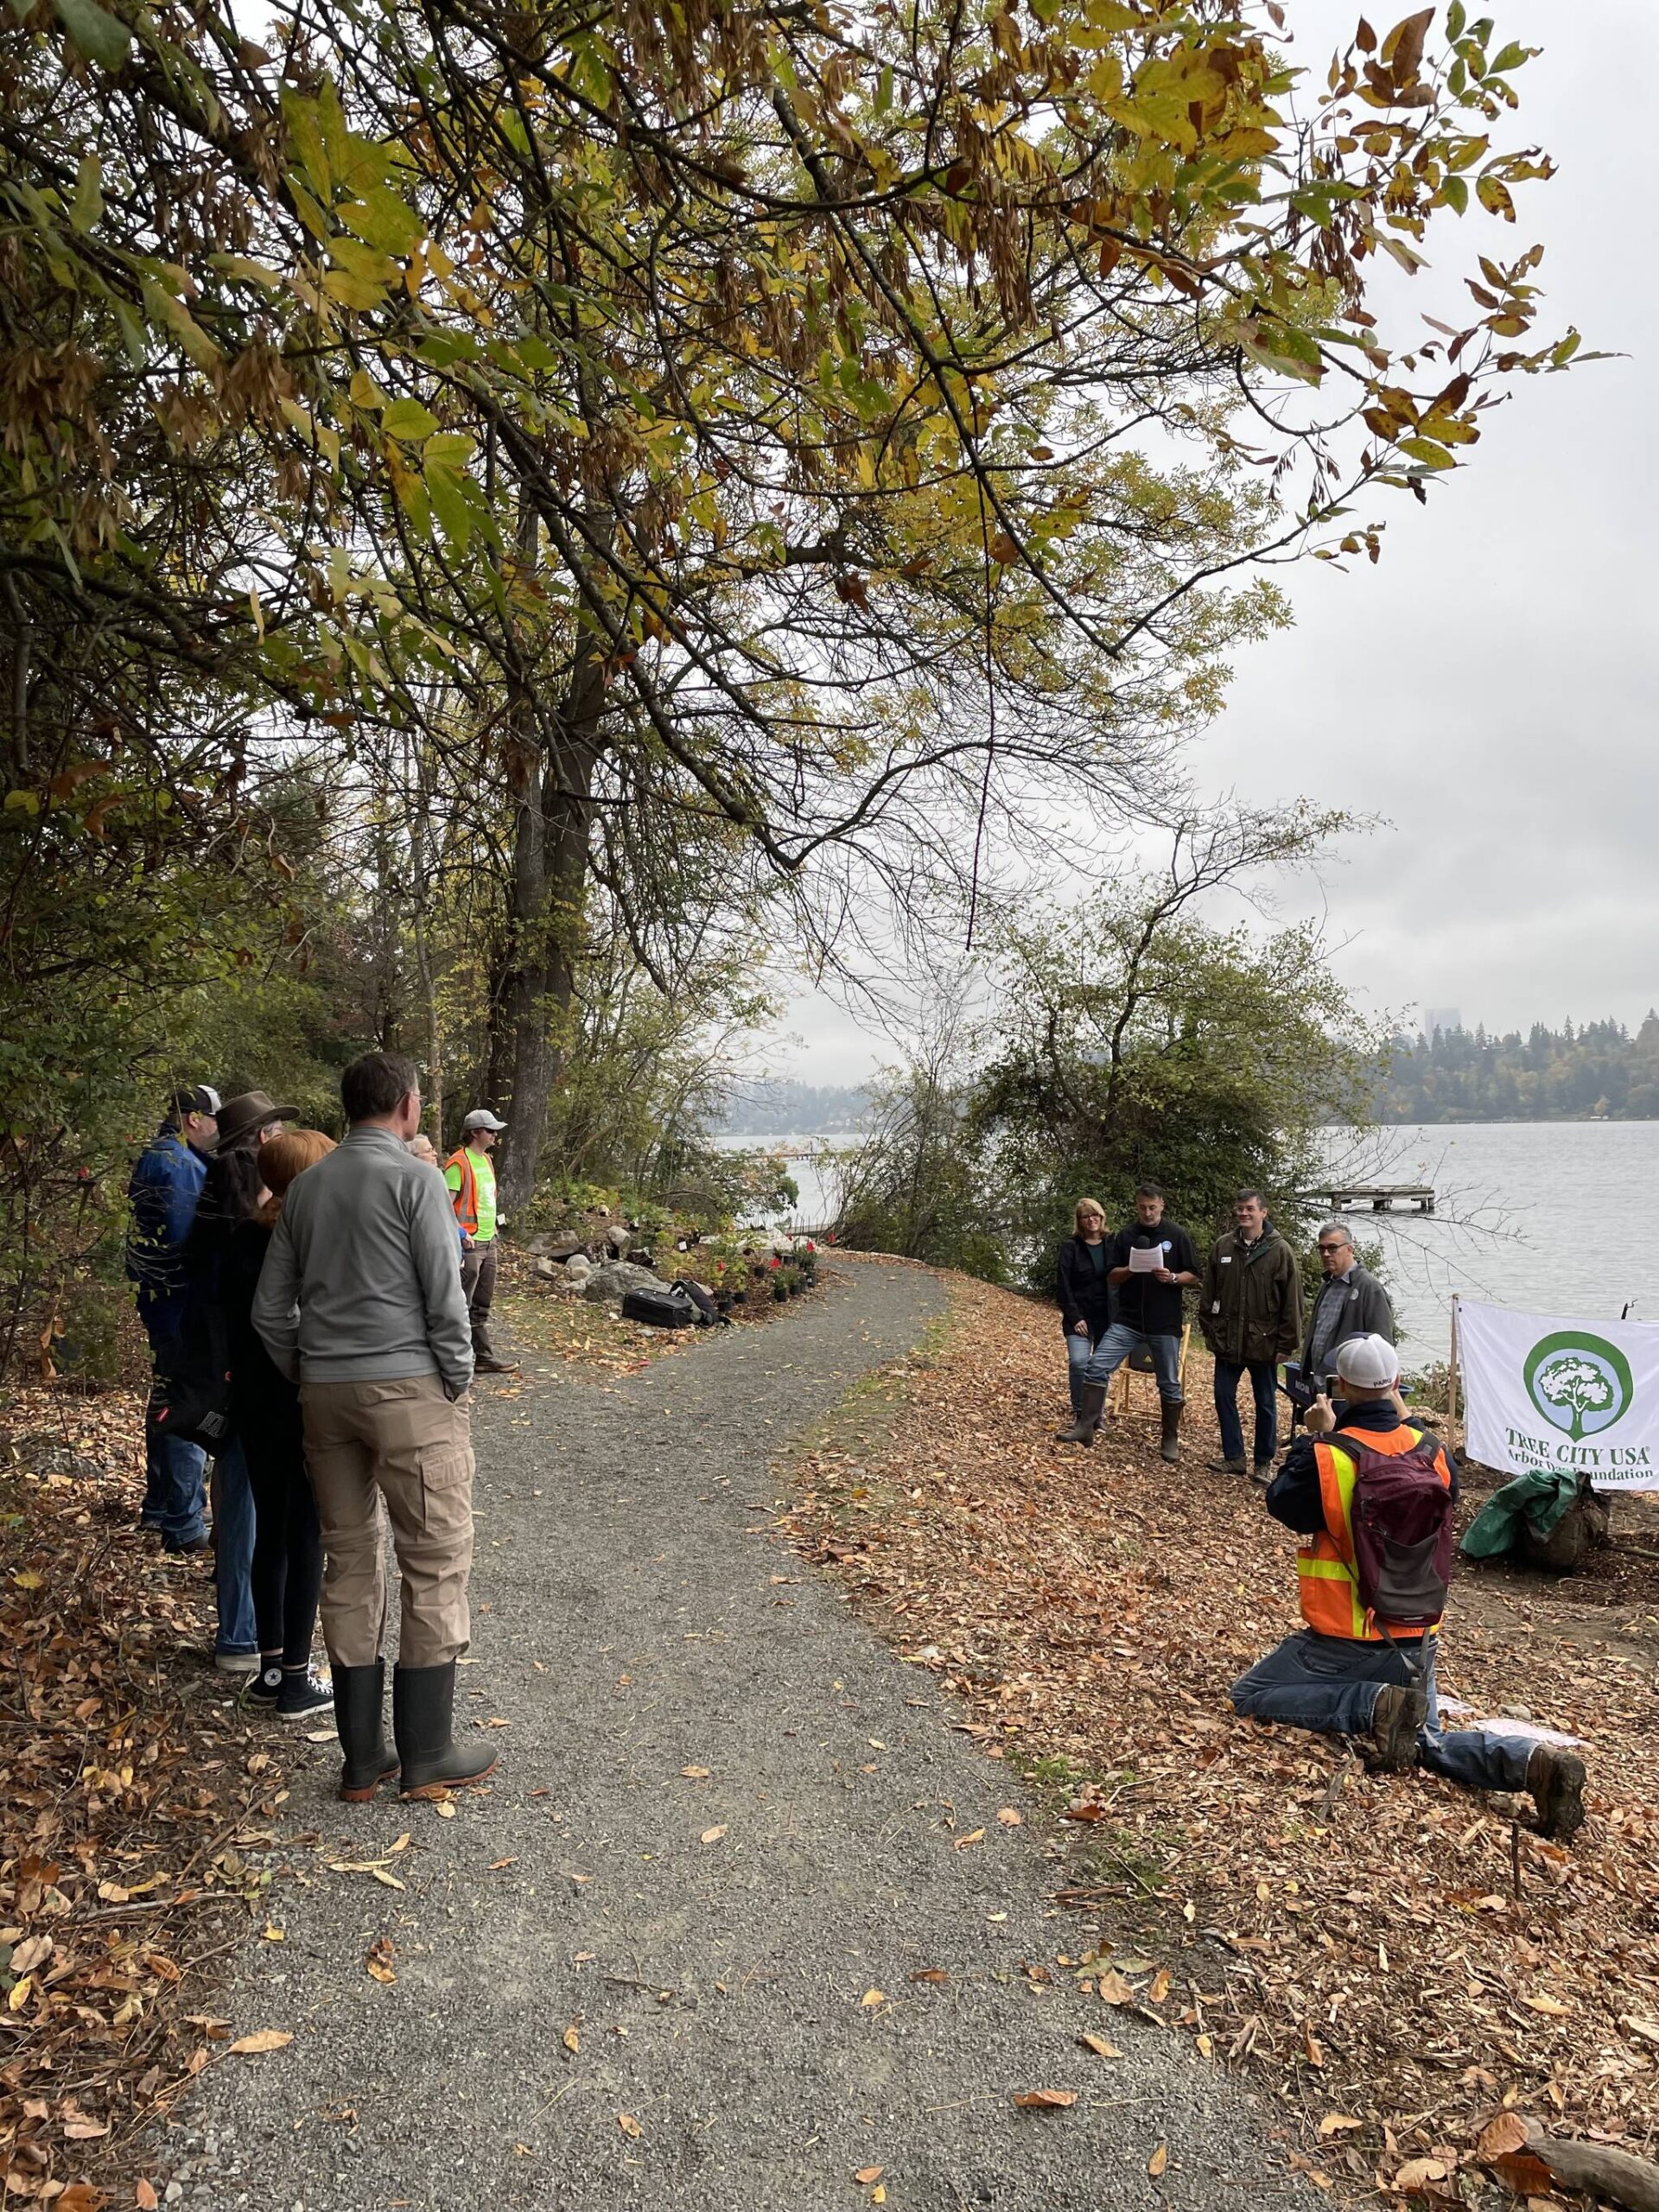 Mayor Salim Nice is joined by city councilmembers Wendy Weiker, Ted Weinberg and Craig Reynolds at the Arbor Day planting event on Oct. 21 at Luther Burbank Park. Photo courtesy of the city of Mercer Island